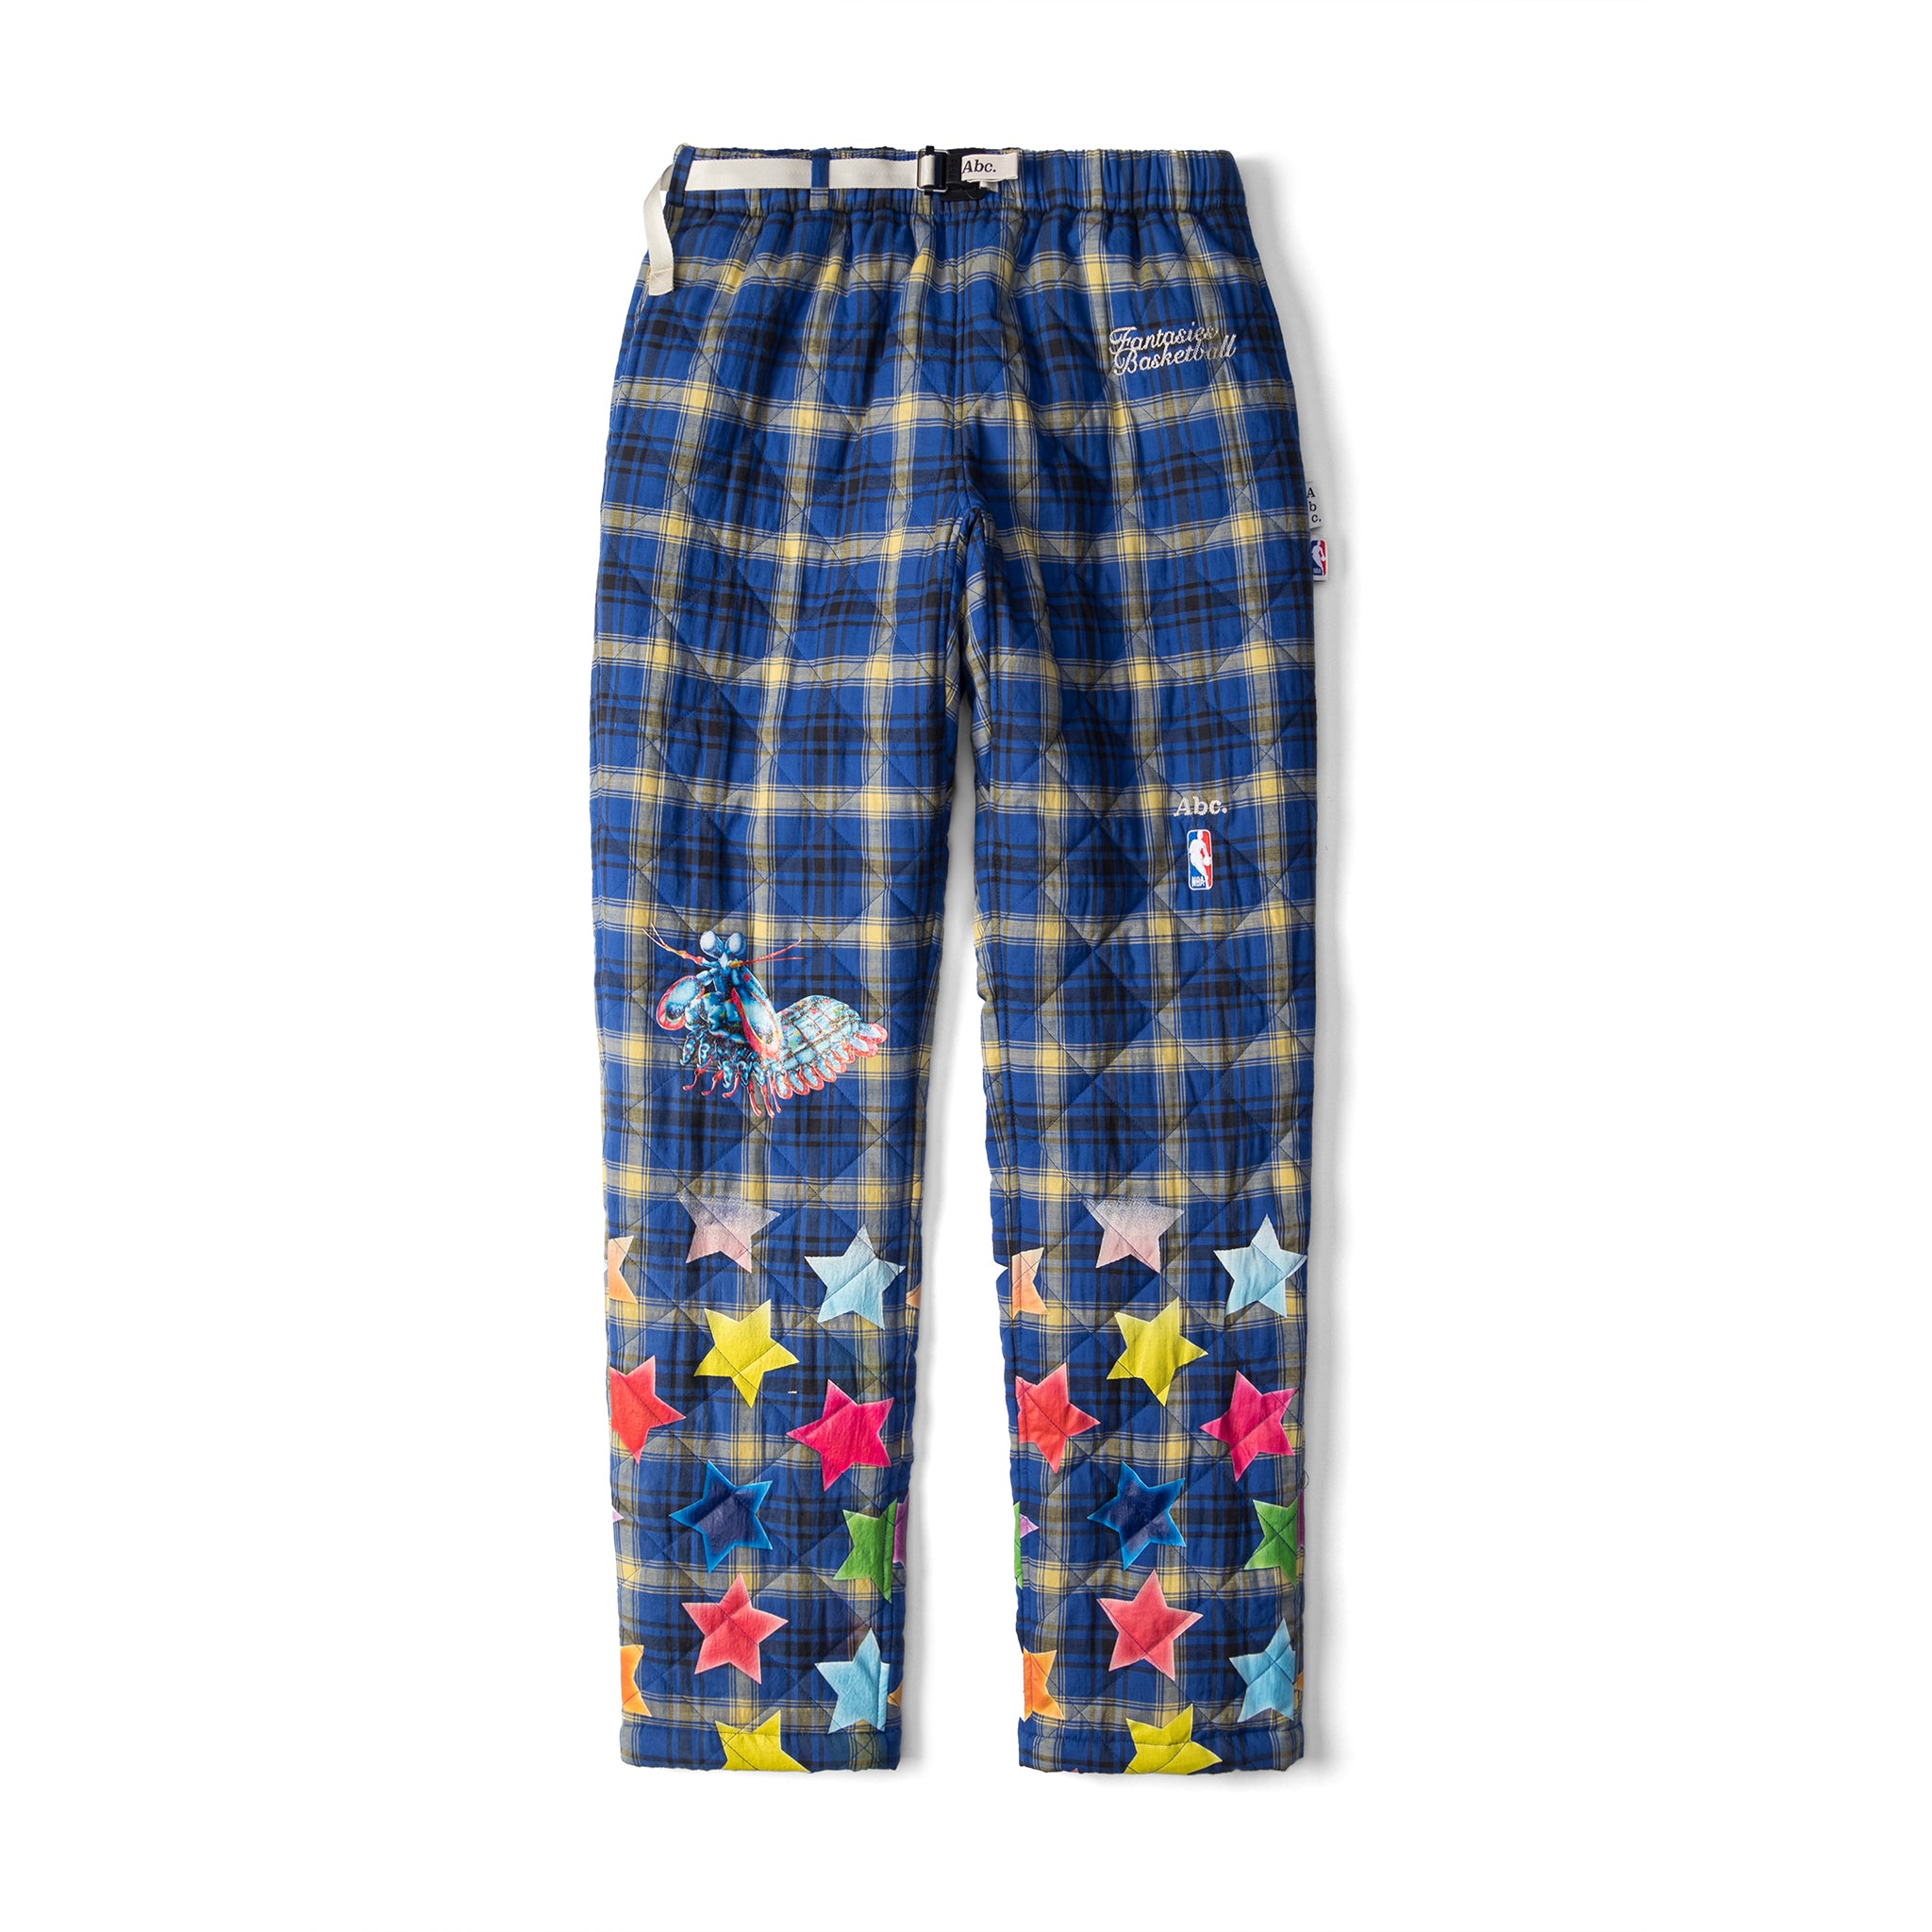 Abc. NBA Quilted Coaches Pant (Blue Plaid)